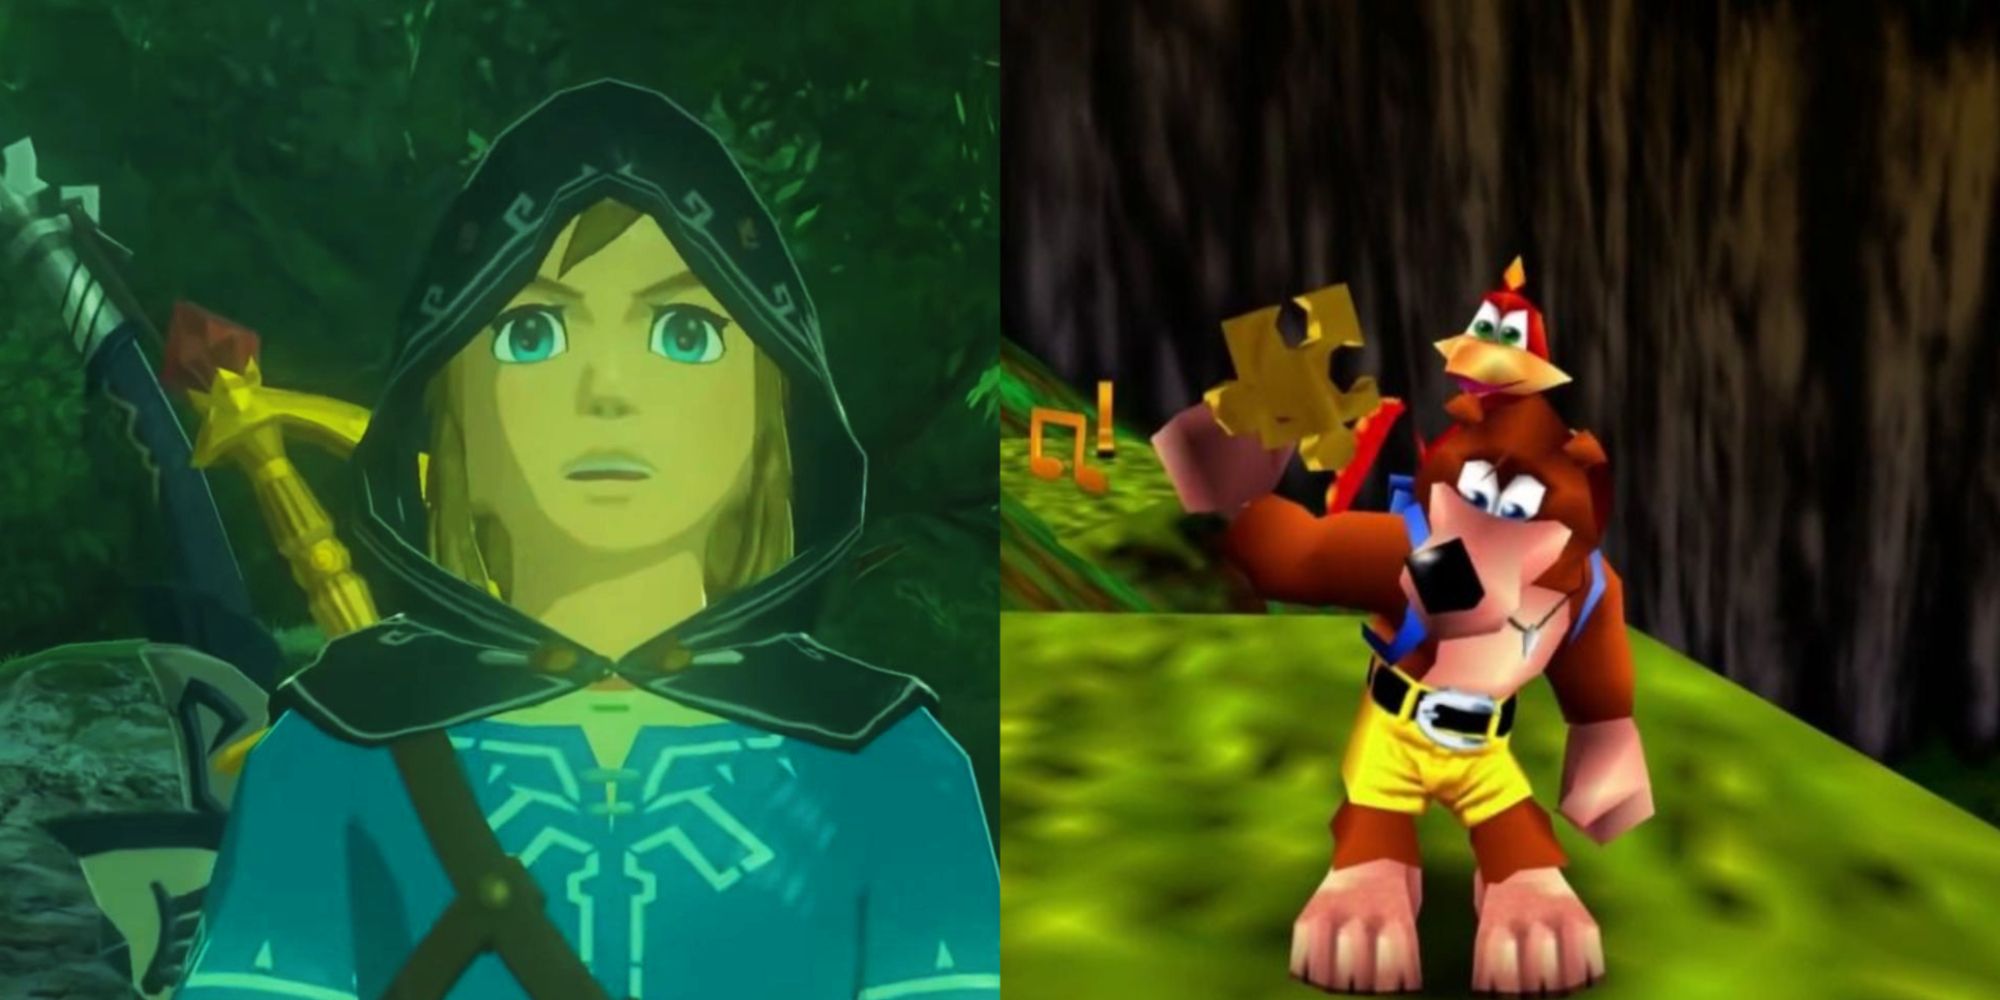 Games With The Most Collectibles Featured Split Image Of Link And Banjo Kazooie